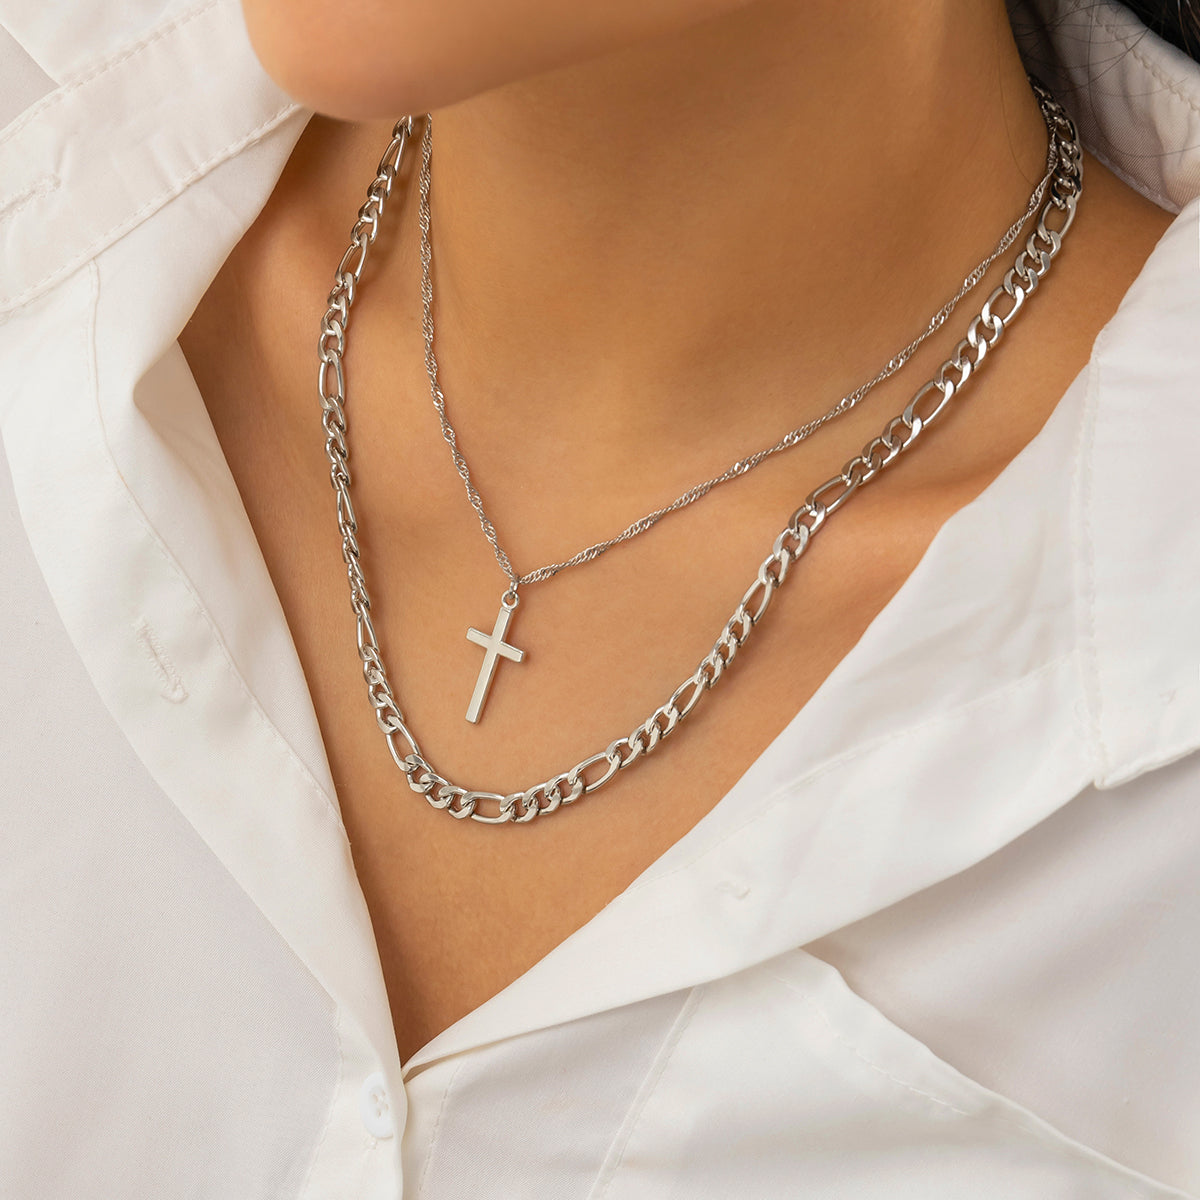 Silver-Plated Cross Pendant Necklace Set